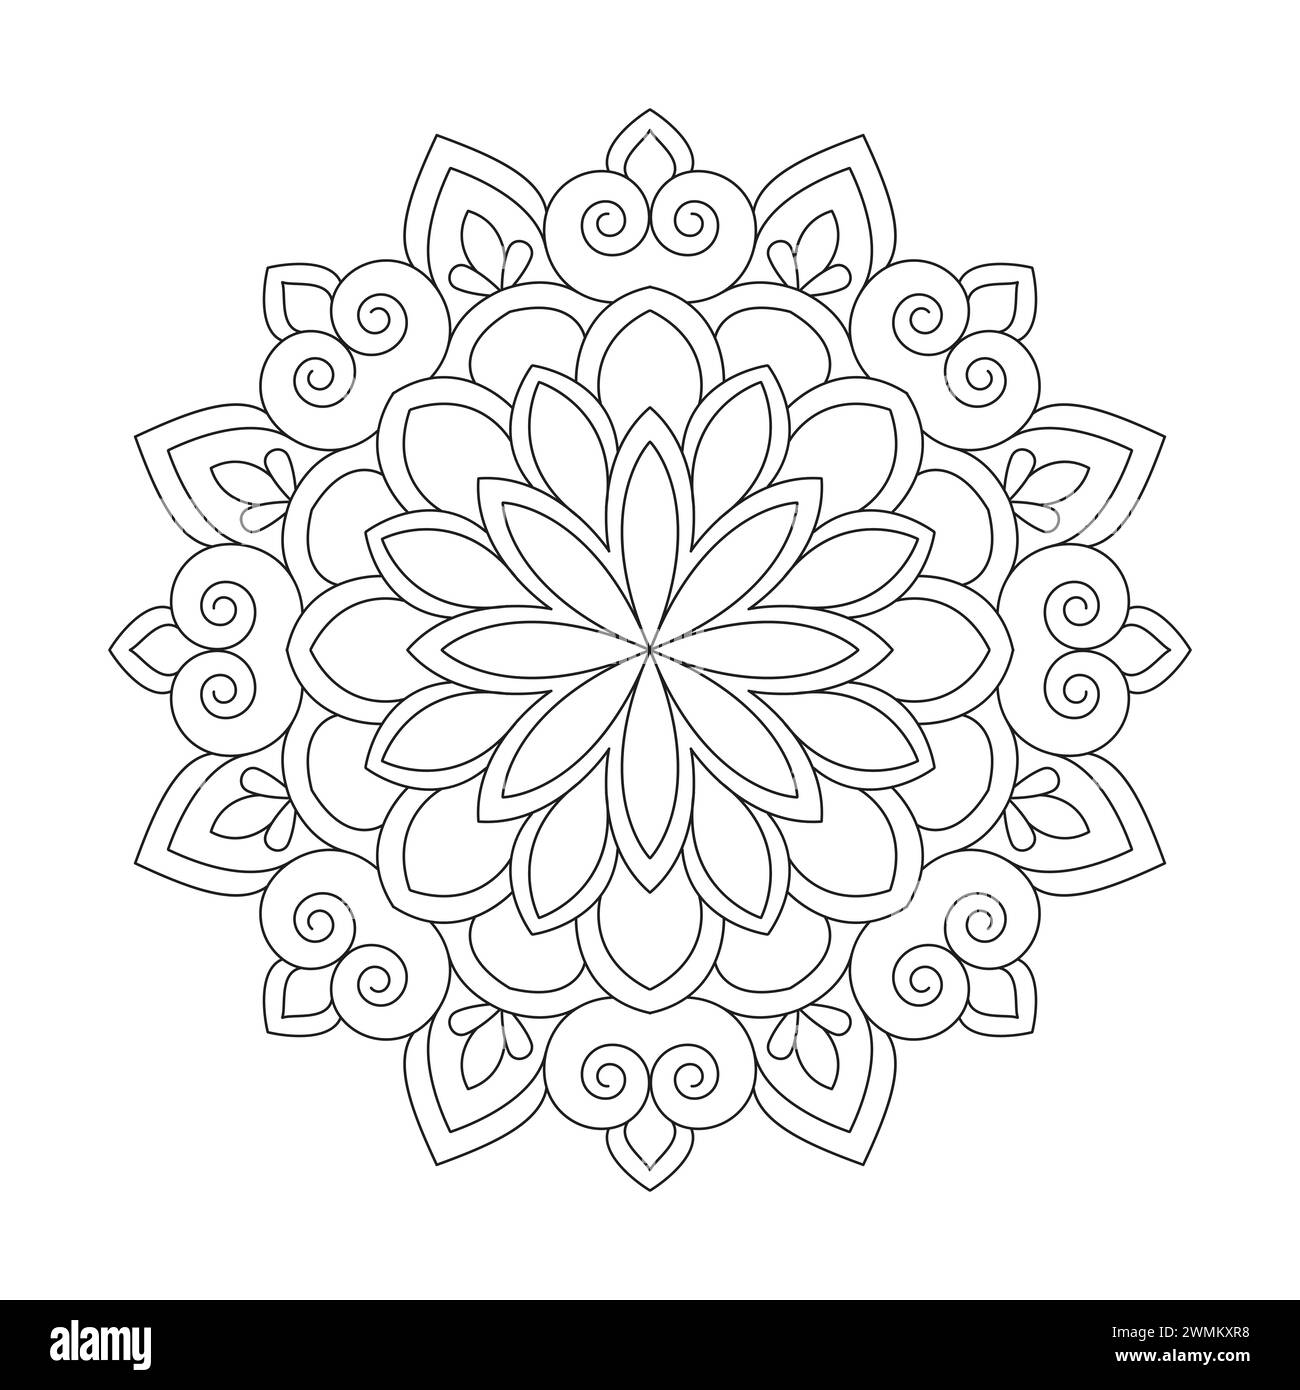 Luminous Decorative Mandala Coloring Book Page for kdp Book Interior. Peaceful Petals, Ability to Relax, Brain Experiences, Harmonious Haven, Peaceful Stock Vector